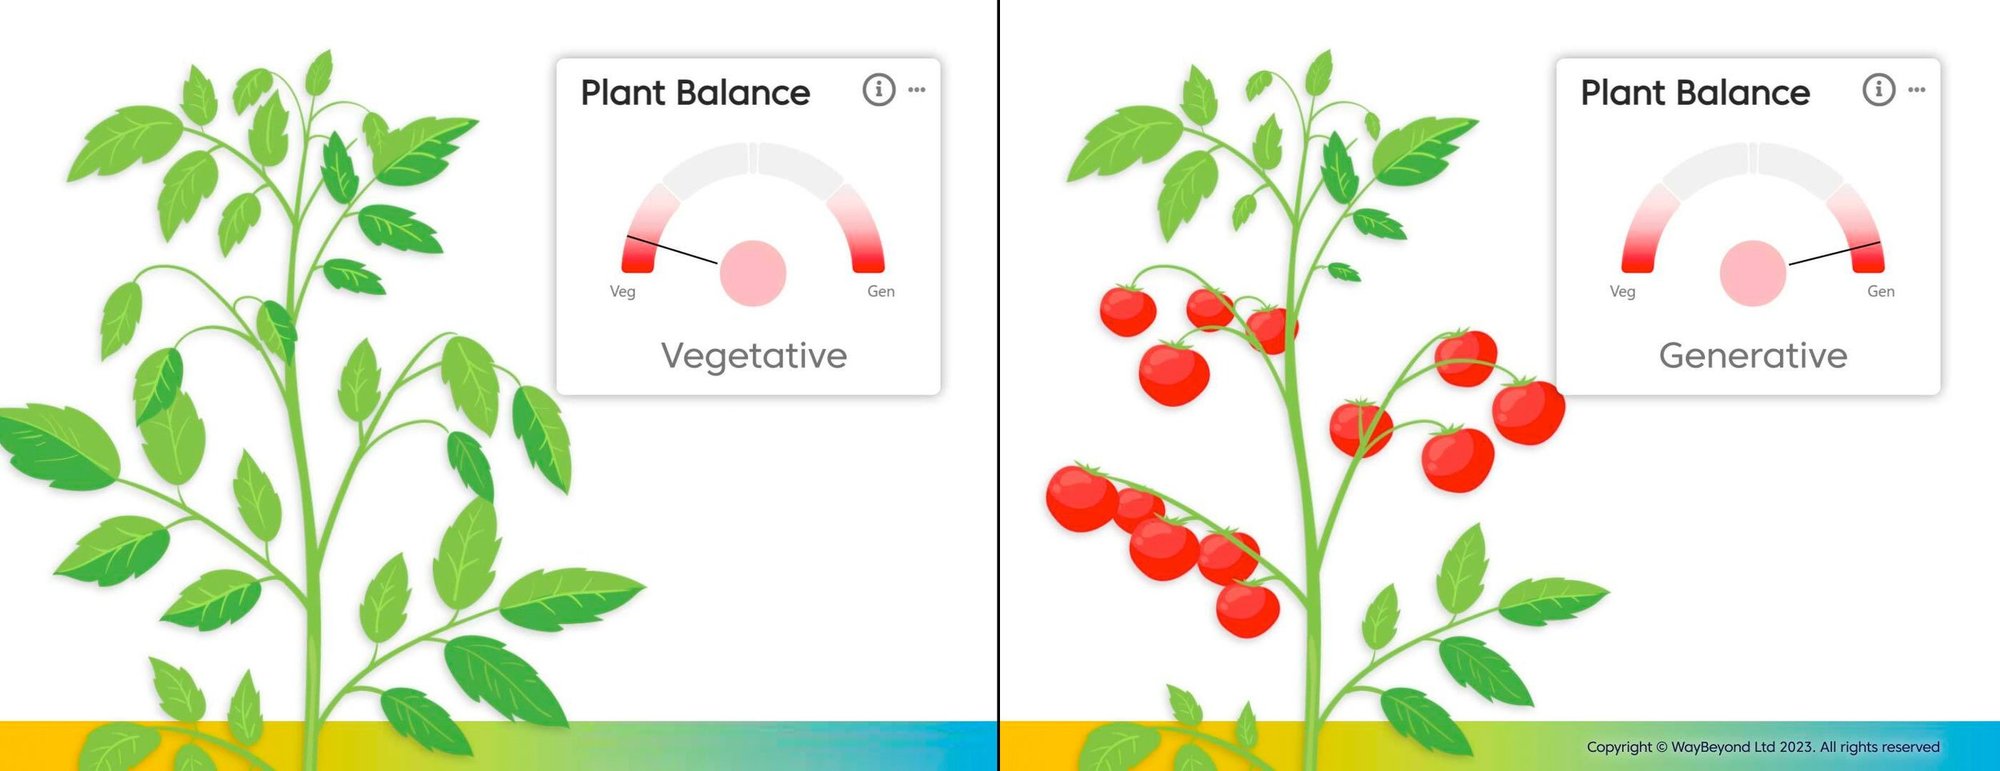 plant-balance-side-by-side